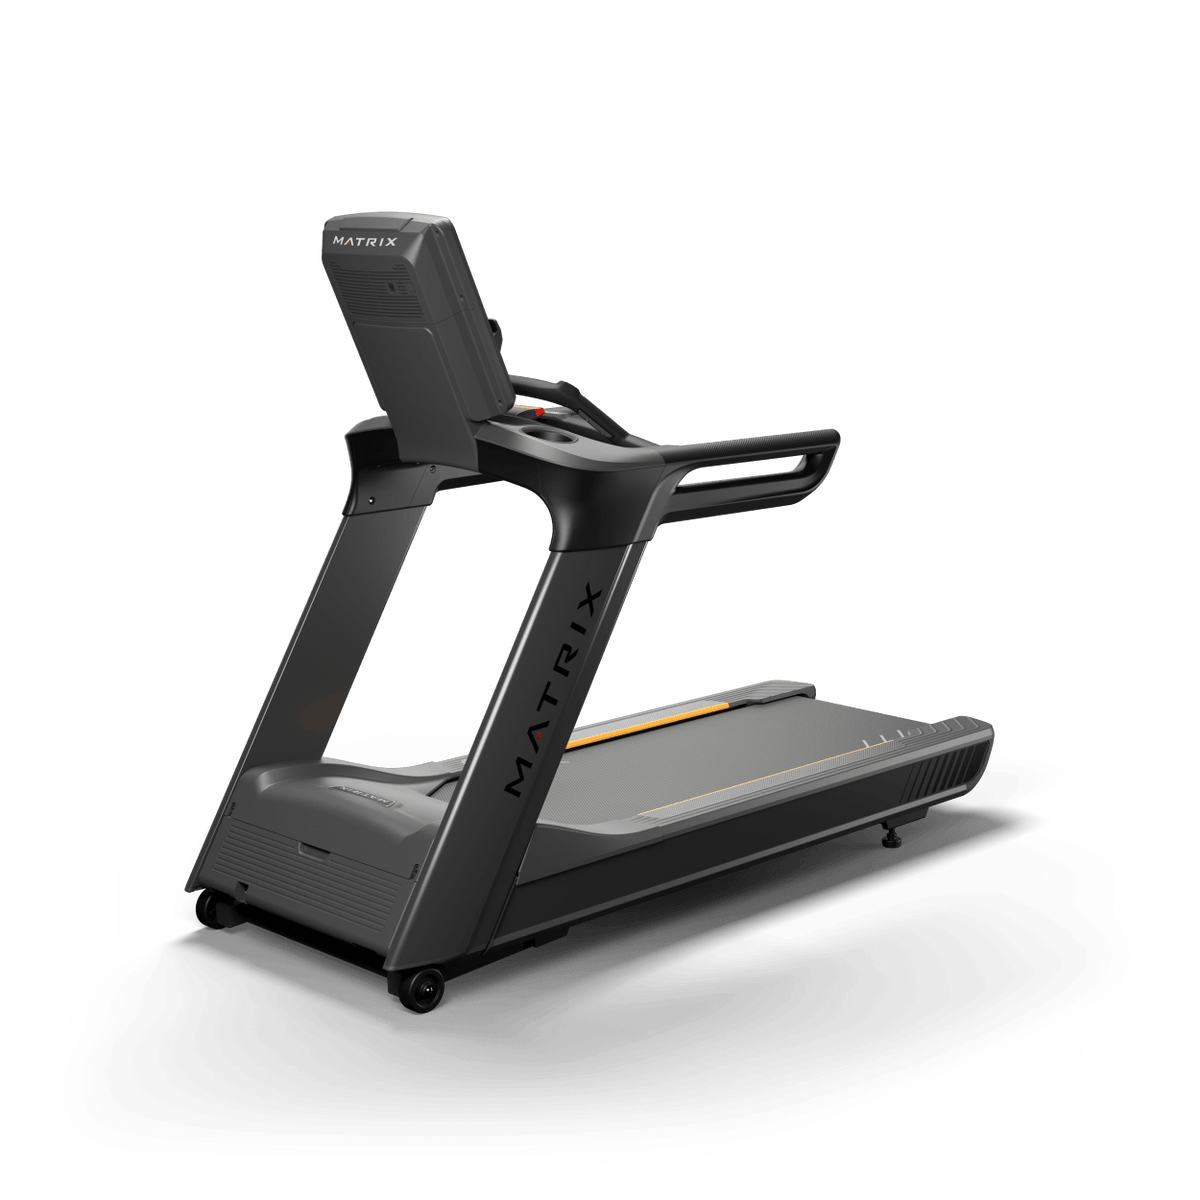 Matrix Fitness Performance Treadmill with LED Console rear view | Fitness Experience